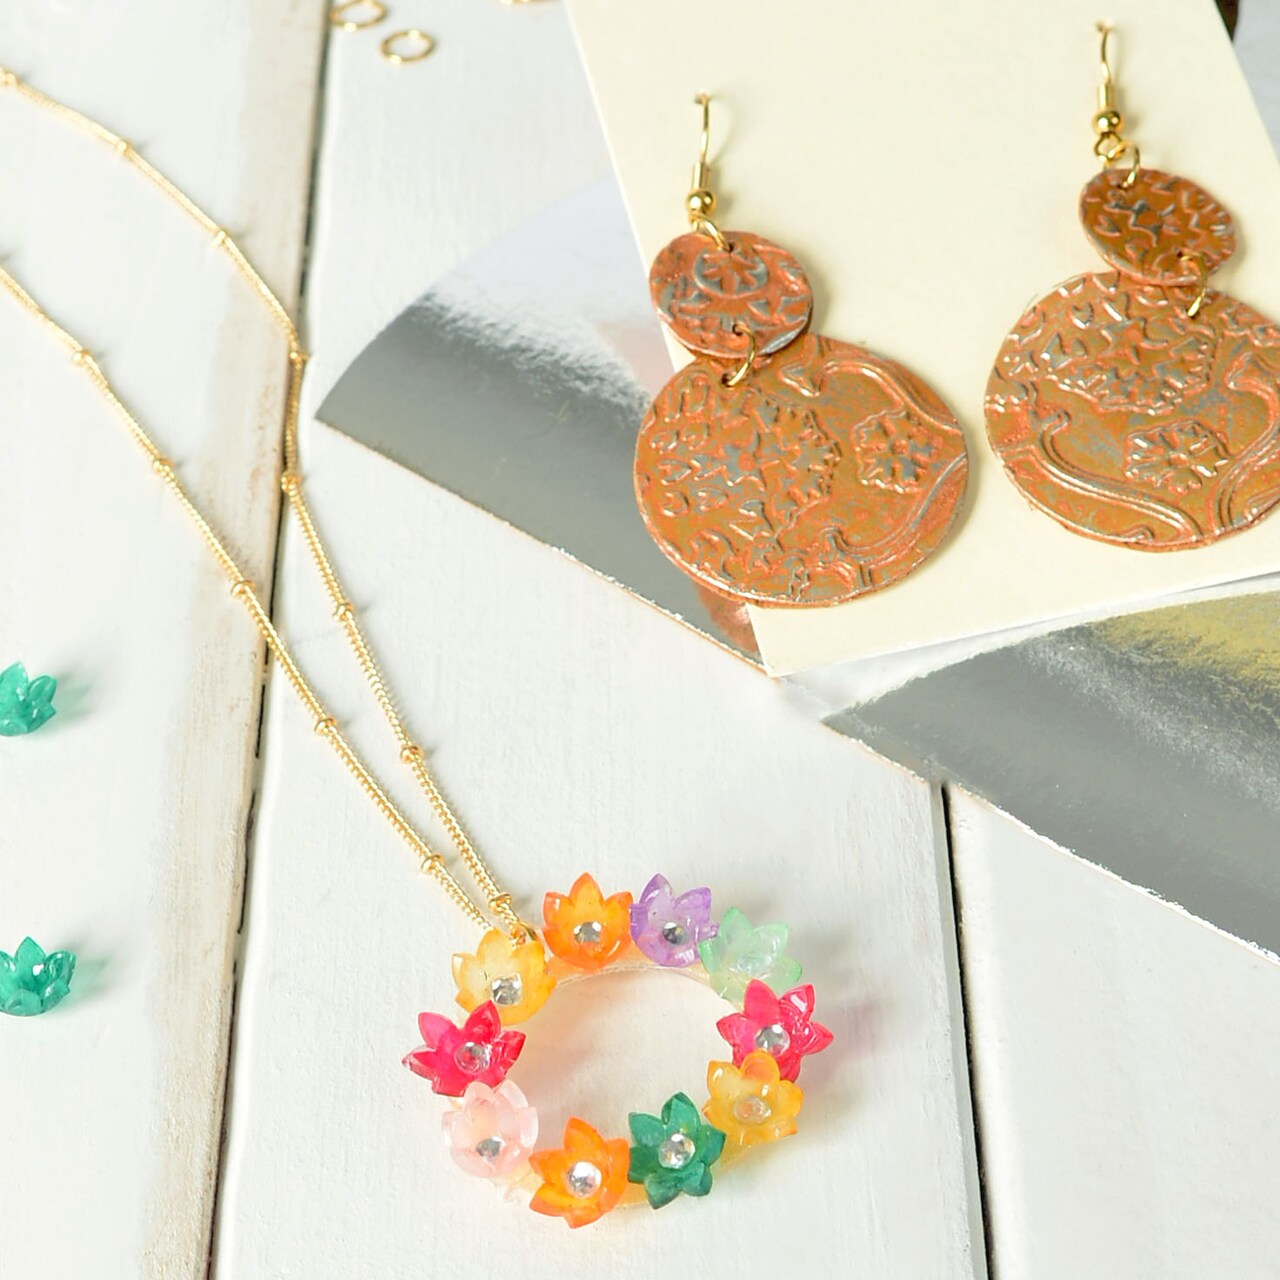 Making Jewelry with Sizzix® Surfacez® Texture Rolls and Shrink Plastic